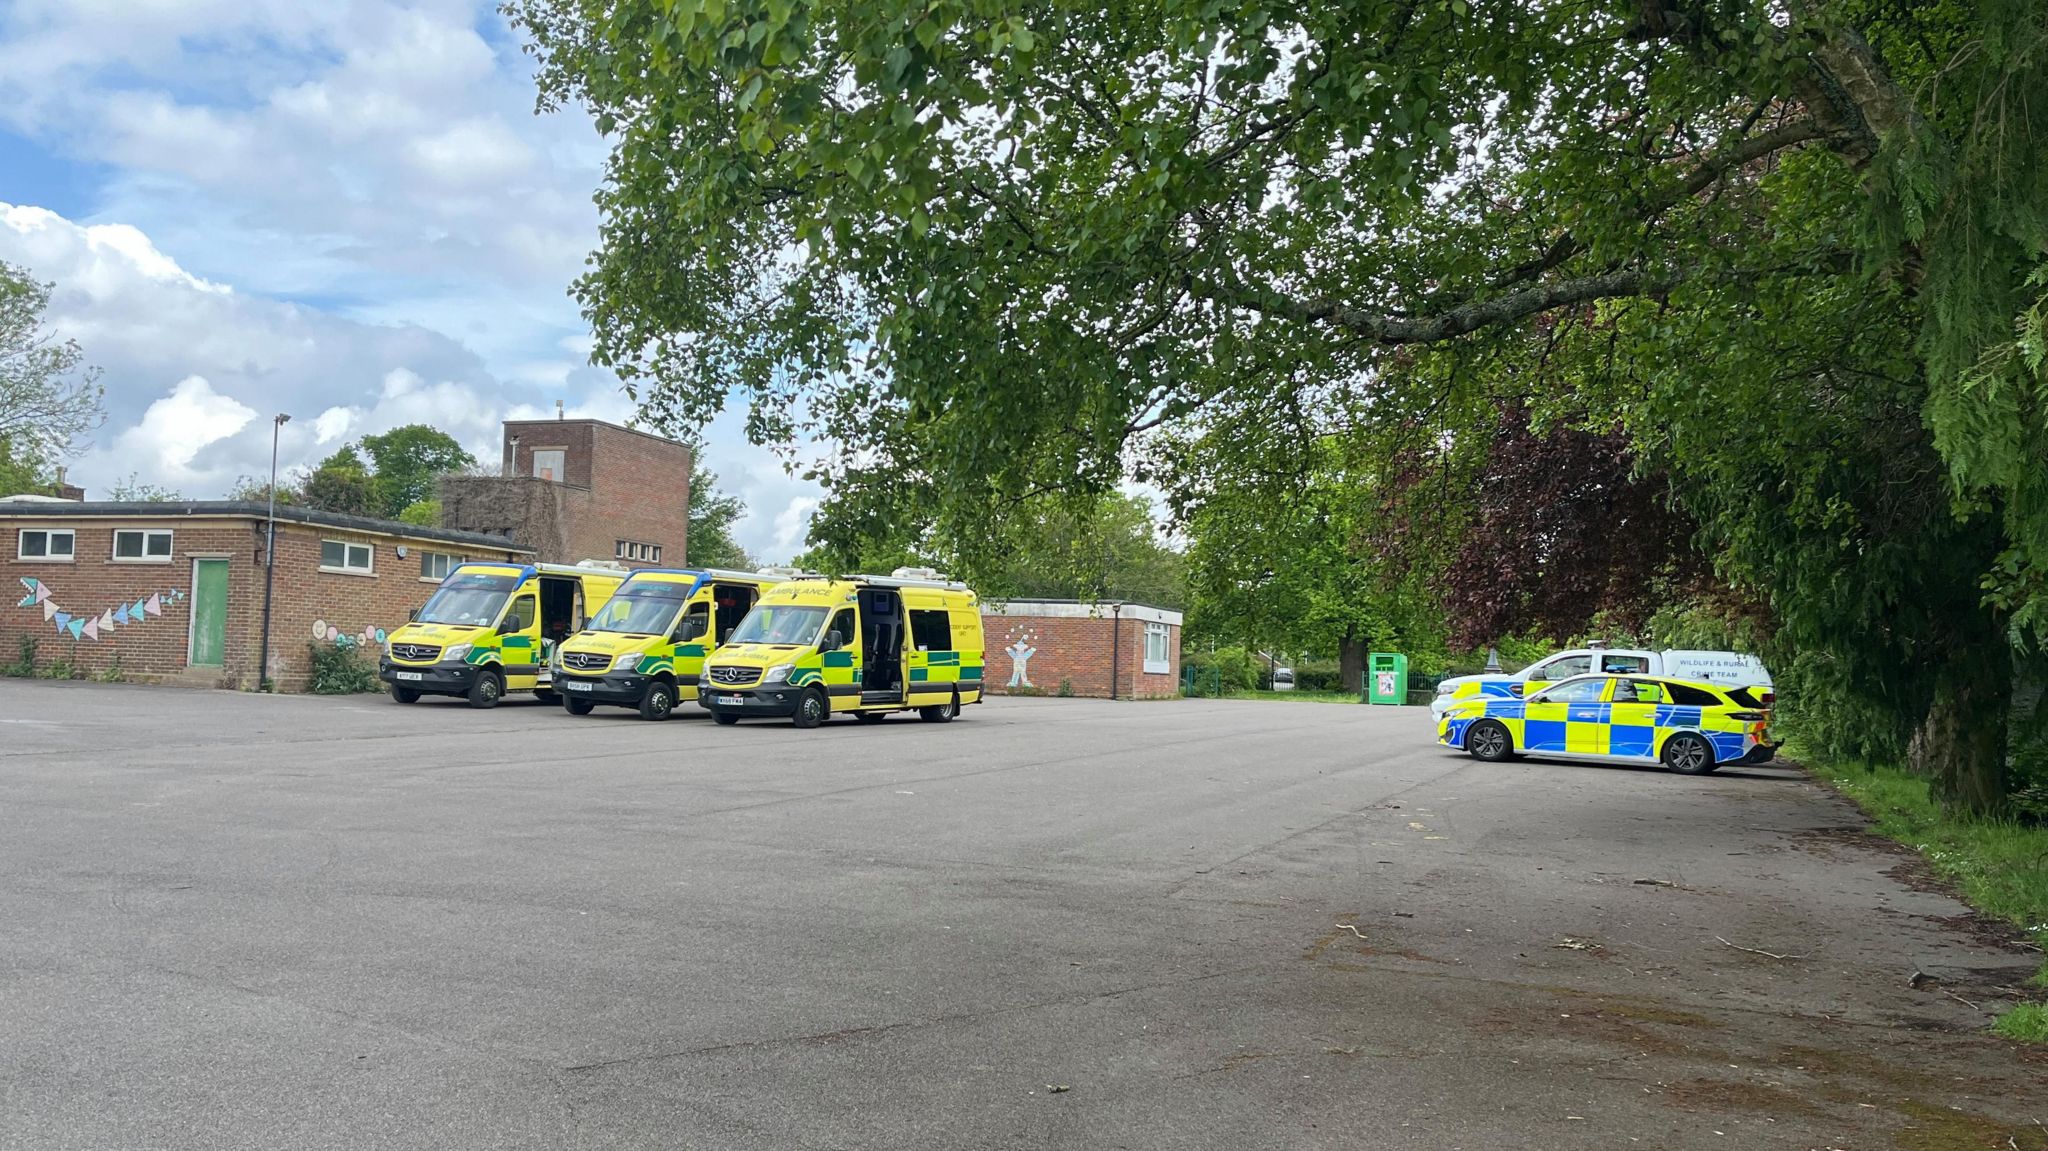 Emergency vehicles including ambulances and police cars parked on a school playground